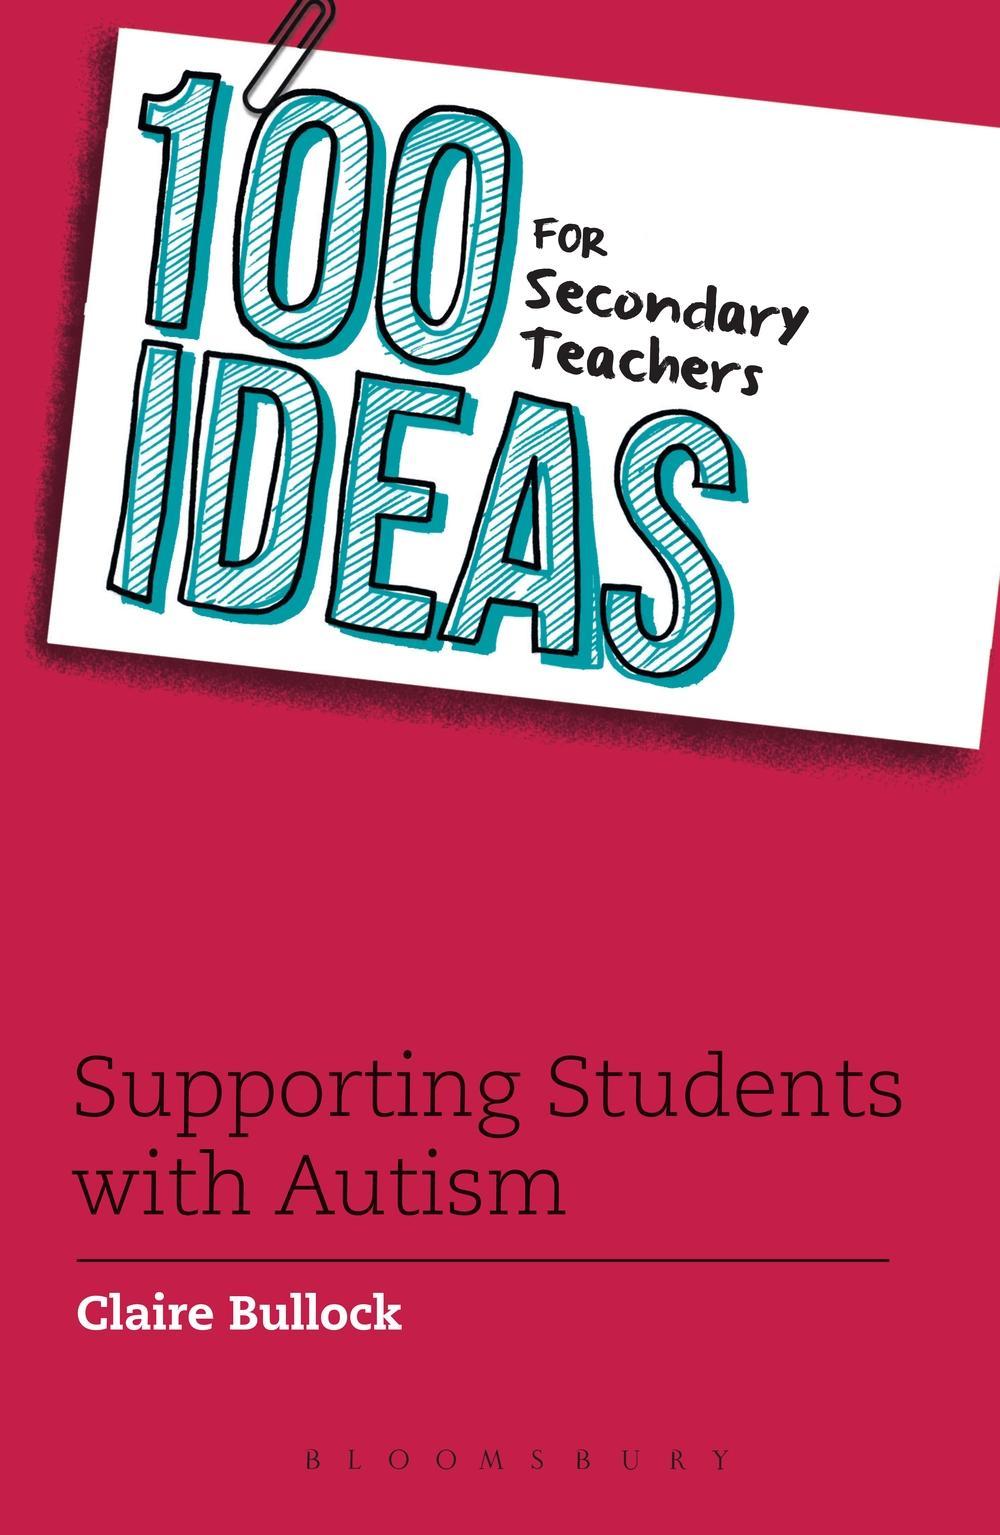 100 Ideas for Secondary Teachers: Supporting Students with A